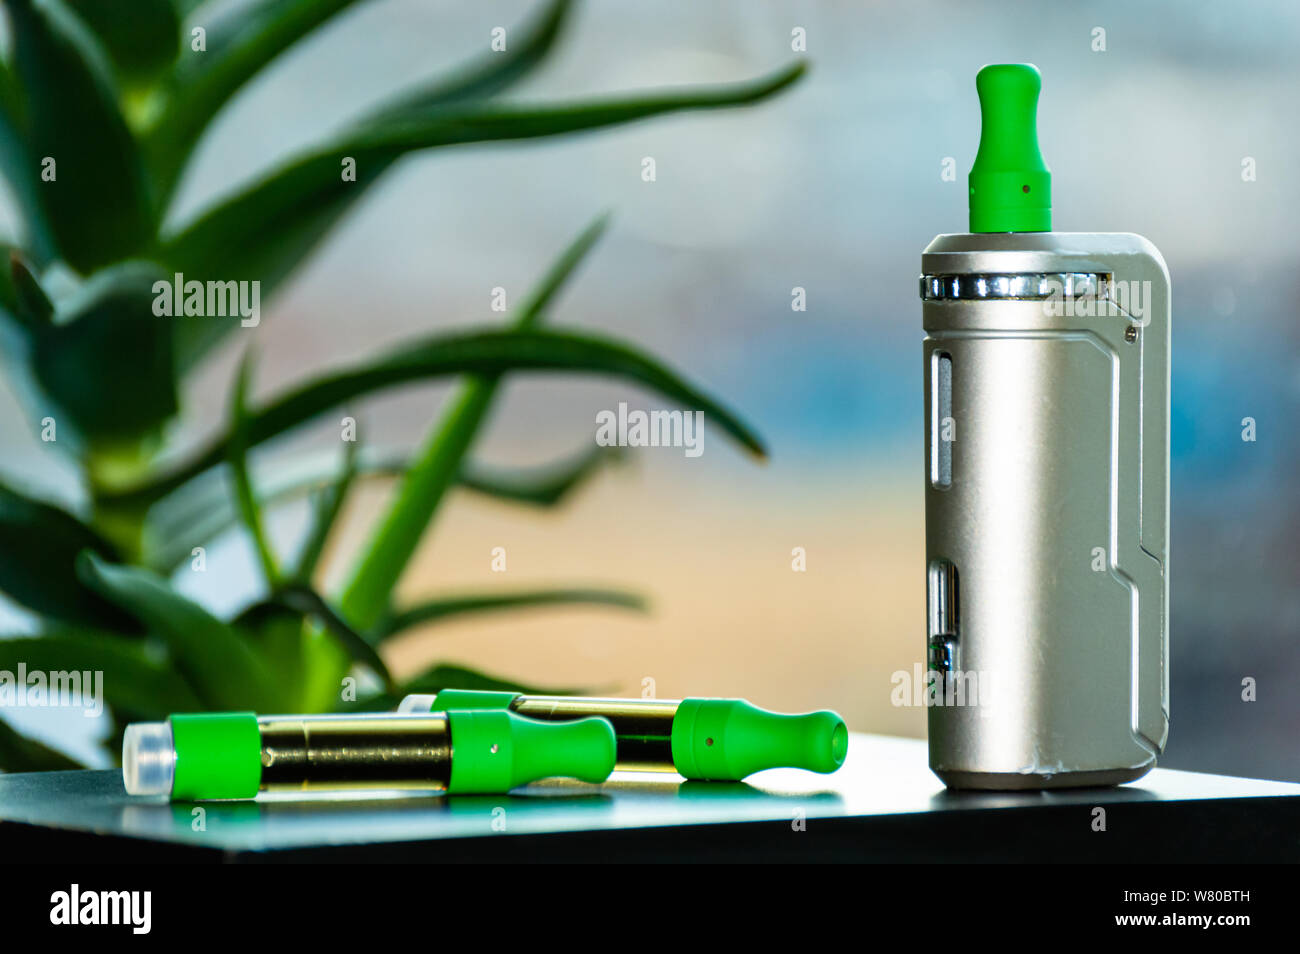 A vape kit including THC CBD cannabis oil cartridge and personal rechargeable vaping device. Stock Photo